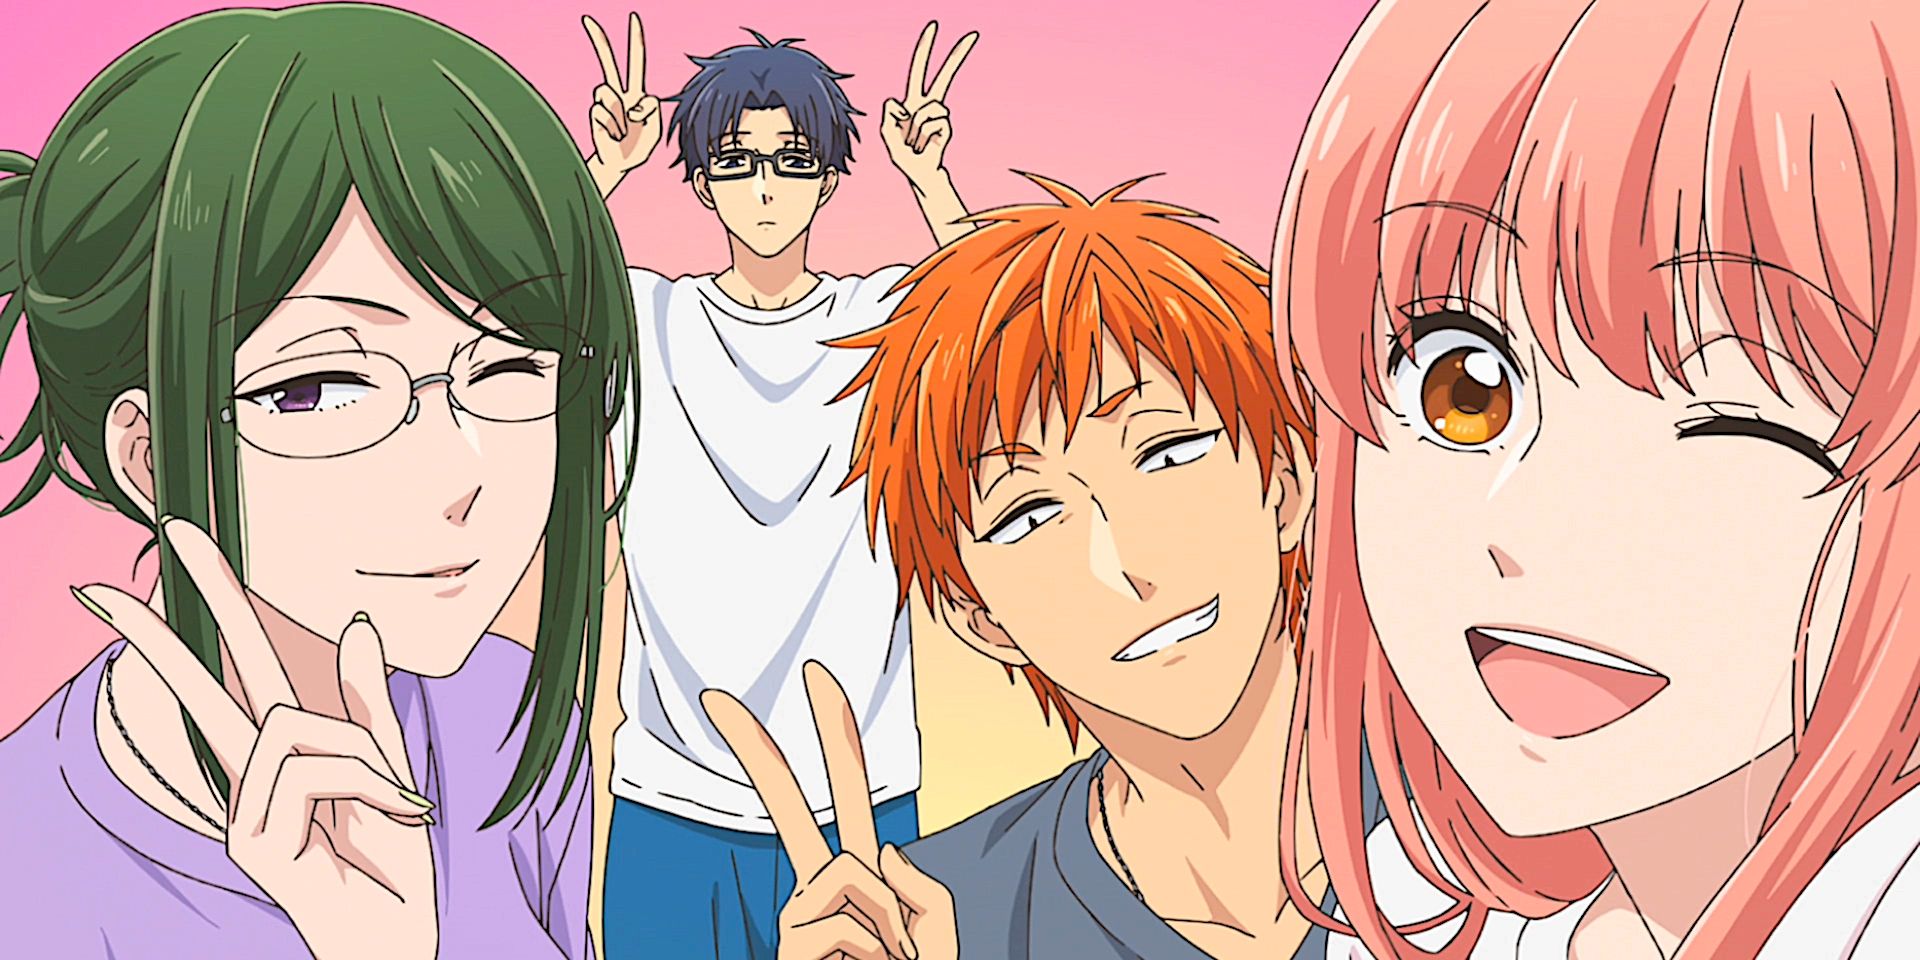 The main cast of characters from Wotakoi all doing the peace hand sign.